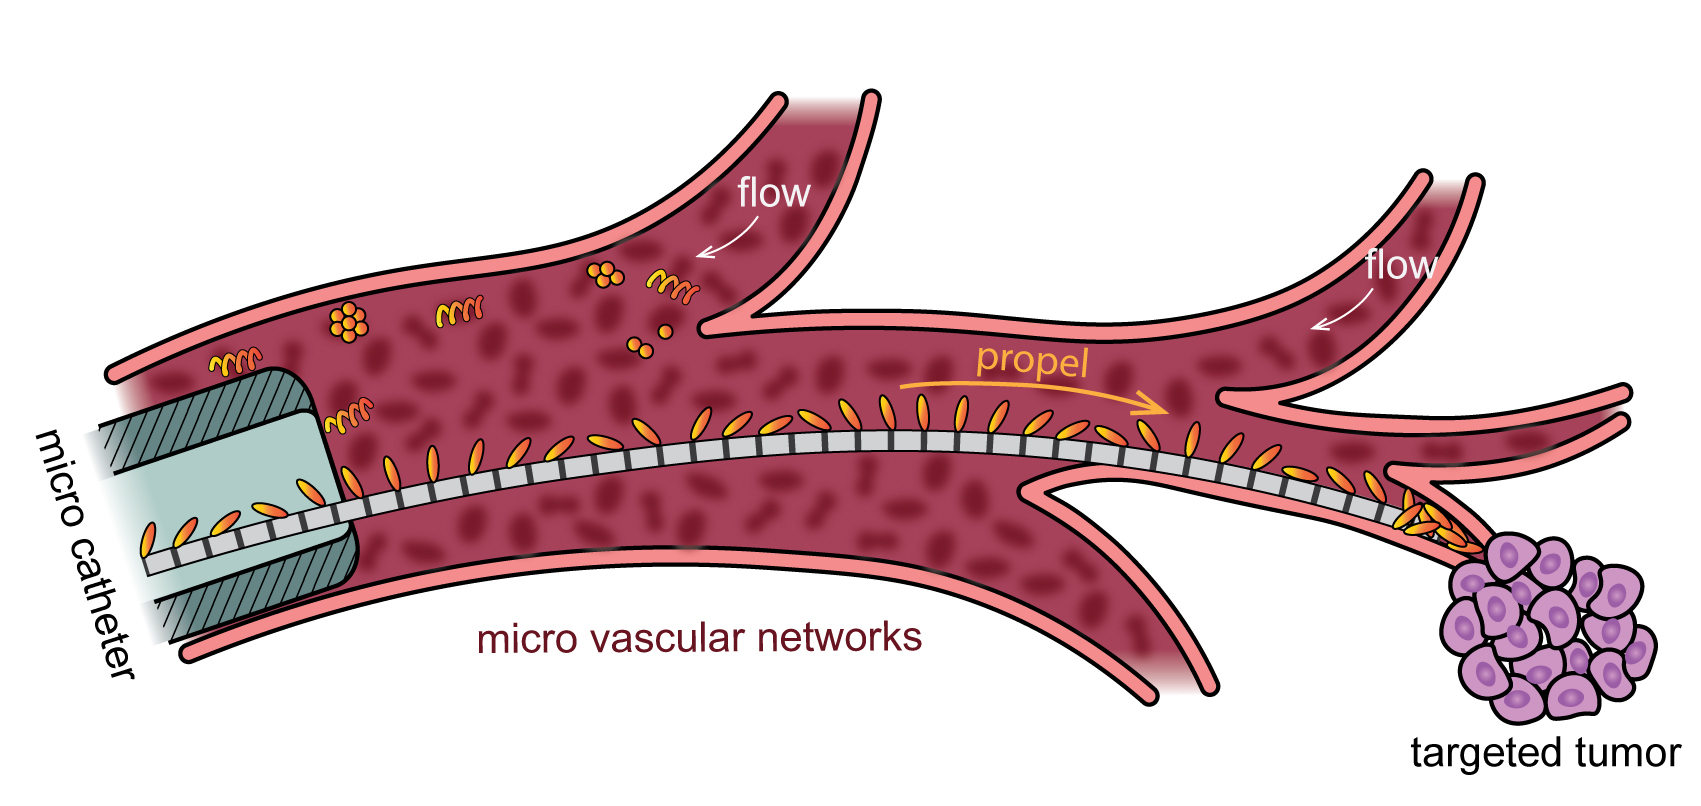 graphic of microvascular networks showing how free-swimming microrobots disperse but a microcatheter propels robots against a flow to a target